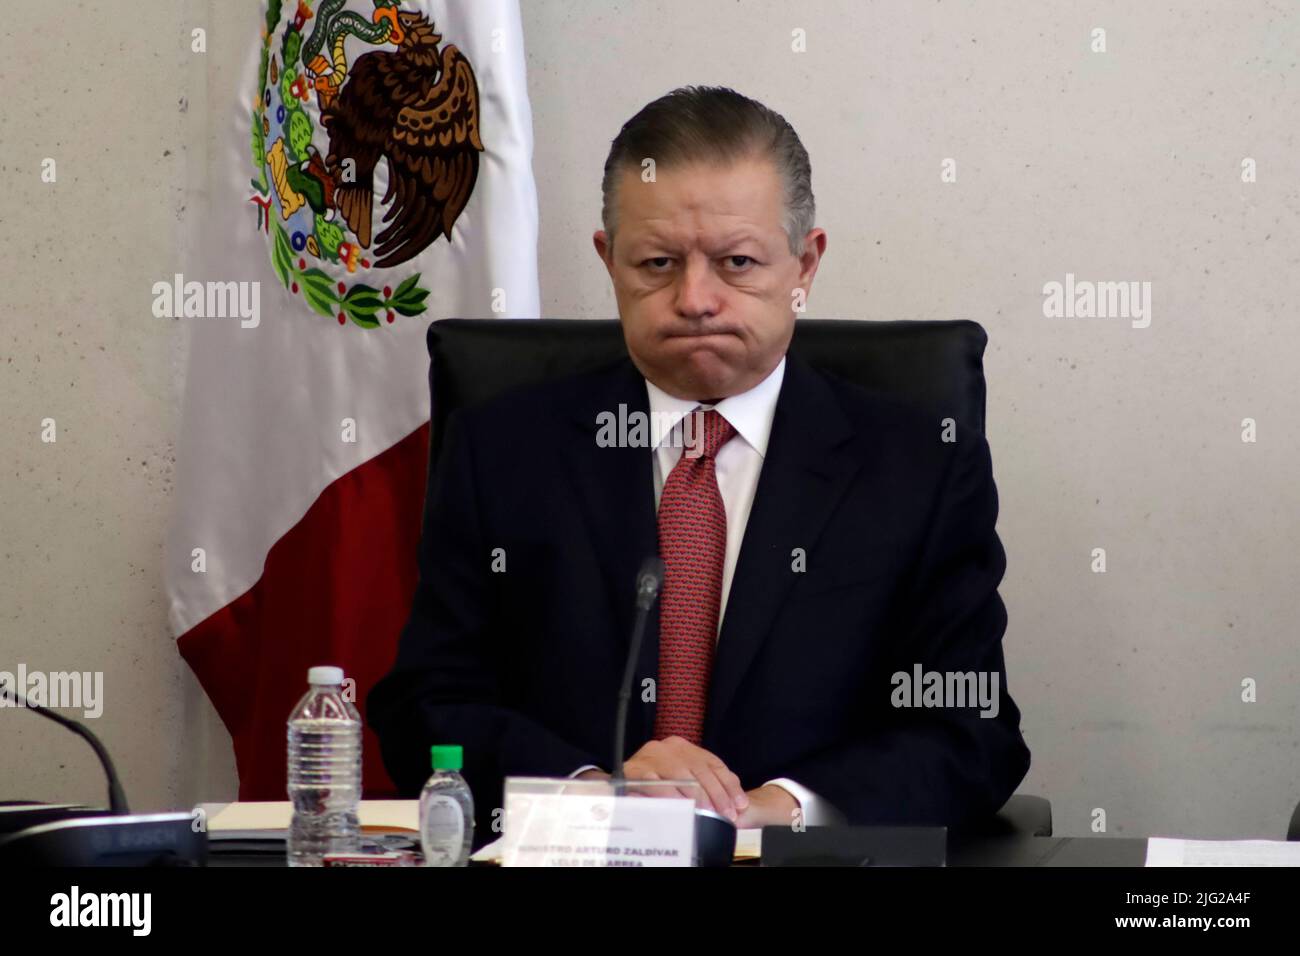 Mexico City, Mexico City, Mexico. 6th July, 2022. July 6, 2022, Mexico City, Mexico: The president of the Supreme Court of Justice of the Nation, Arturo Zaldivar, during a meeting at the Mexico's Senate. on Jul 6, 2022 In Mexico City, Mexico. Credit: ZUMA Press, Inc./Alamy Live News Stock Photo